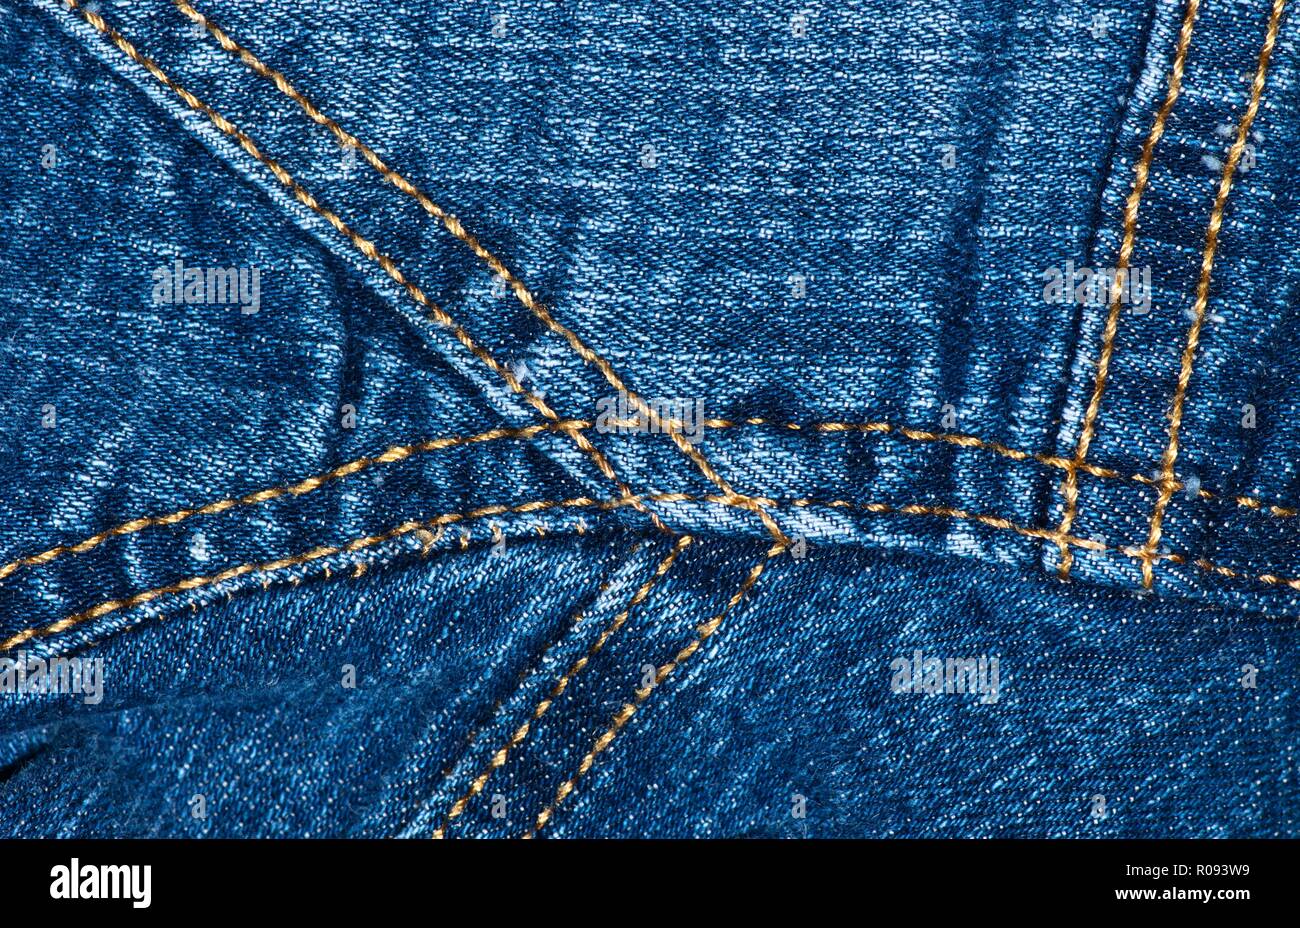 A close up section of a blue denim jacket, showing seams, creases and textures. Stock Photo